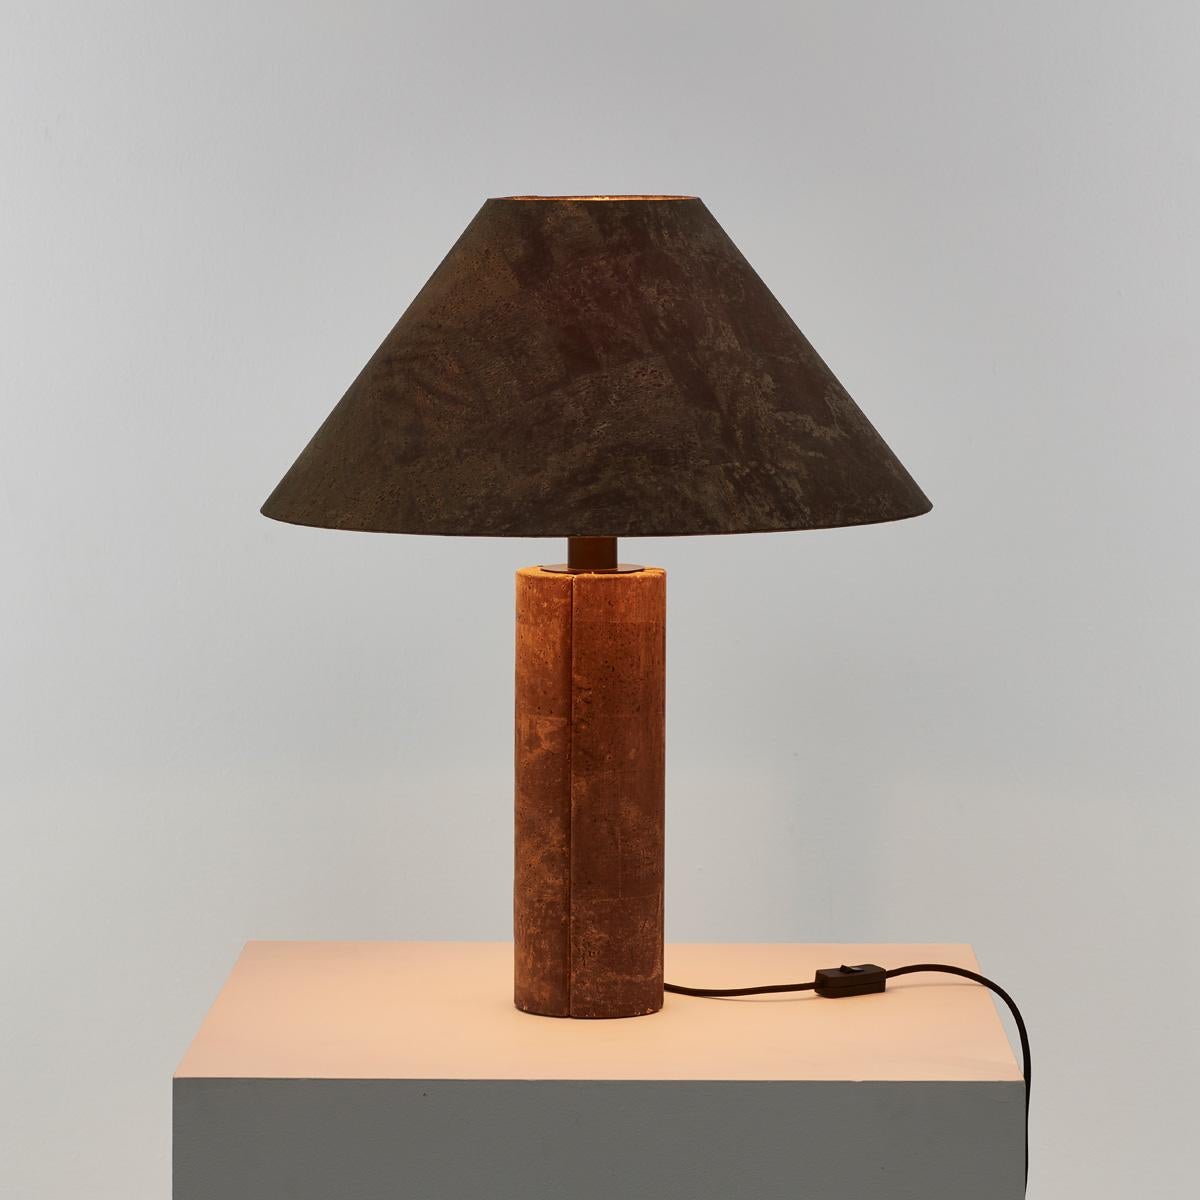 Late 20th Century Pair of Ingo Maurer Cork Lamps for Design M, Germany 1974 For Sale